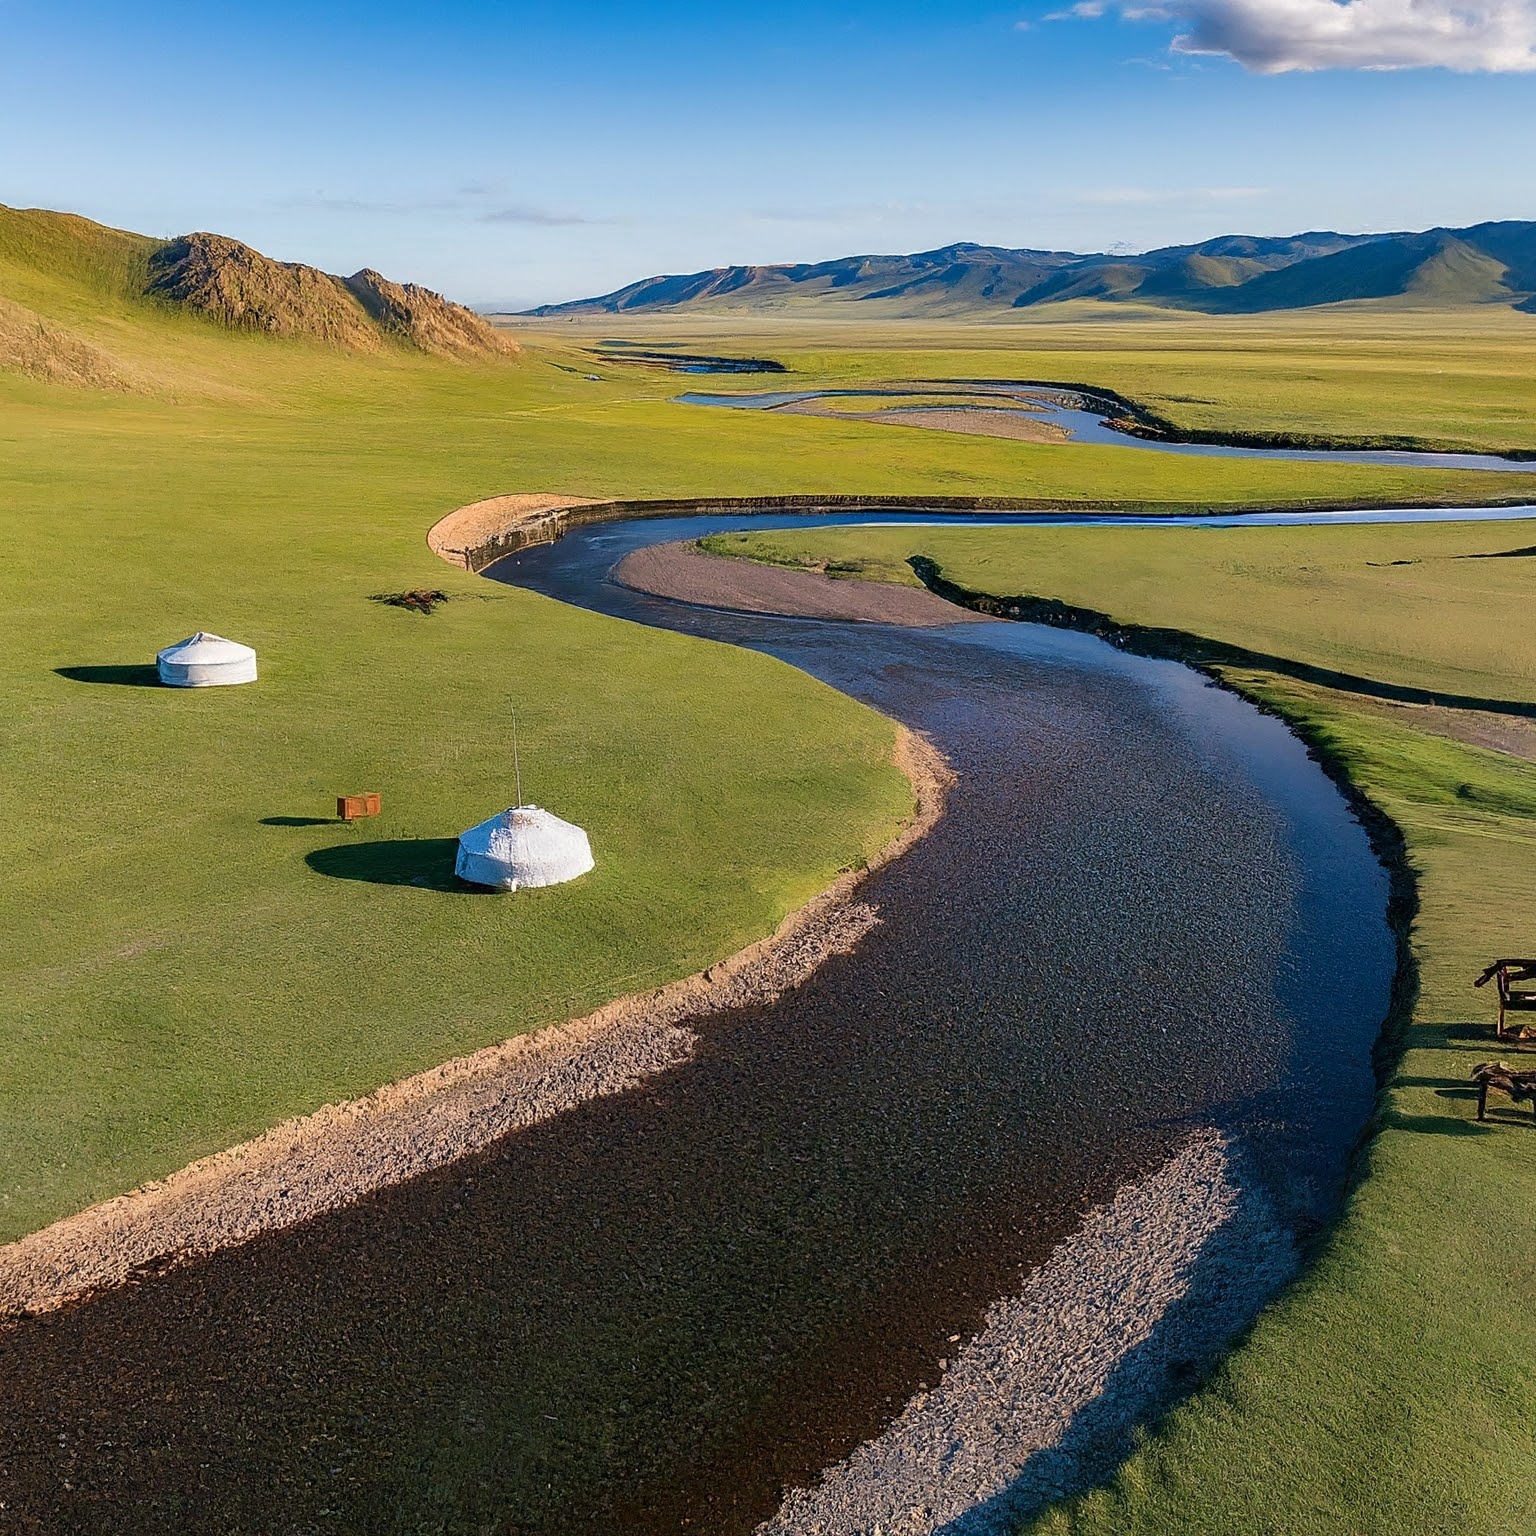 Orkhon Valley, Mongolia, with a winding river, grazing horses, and traditional gers.